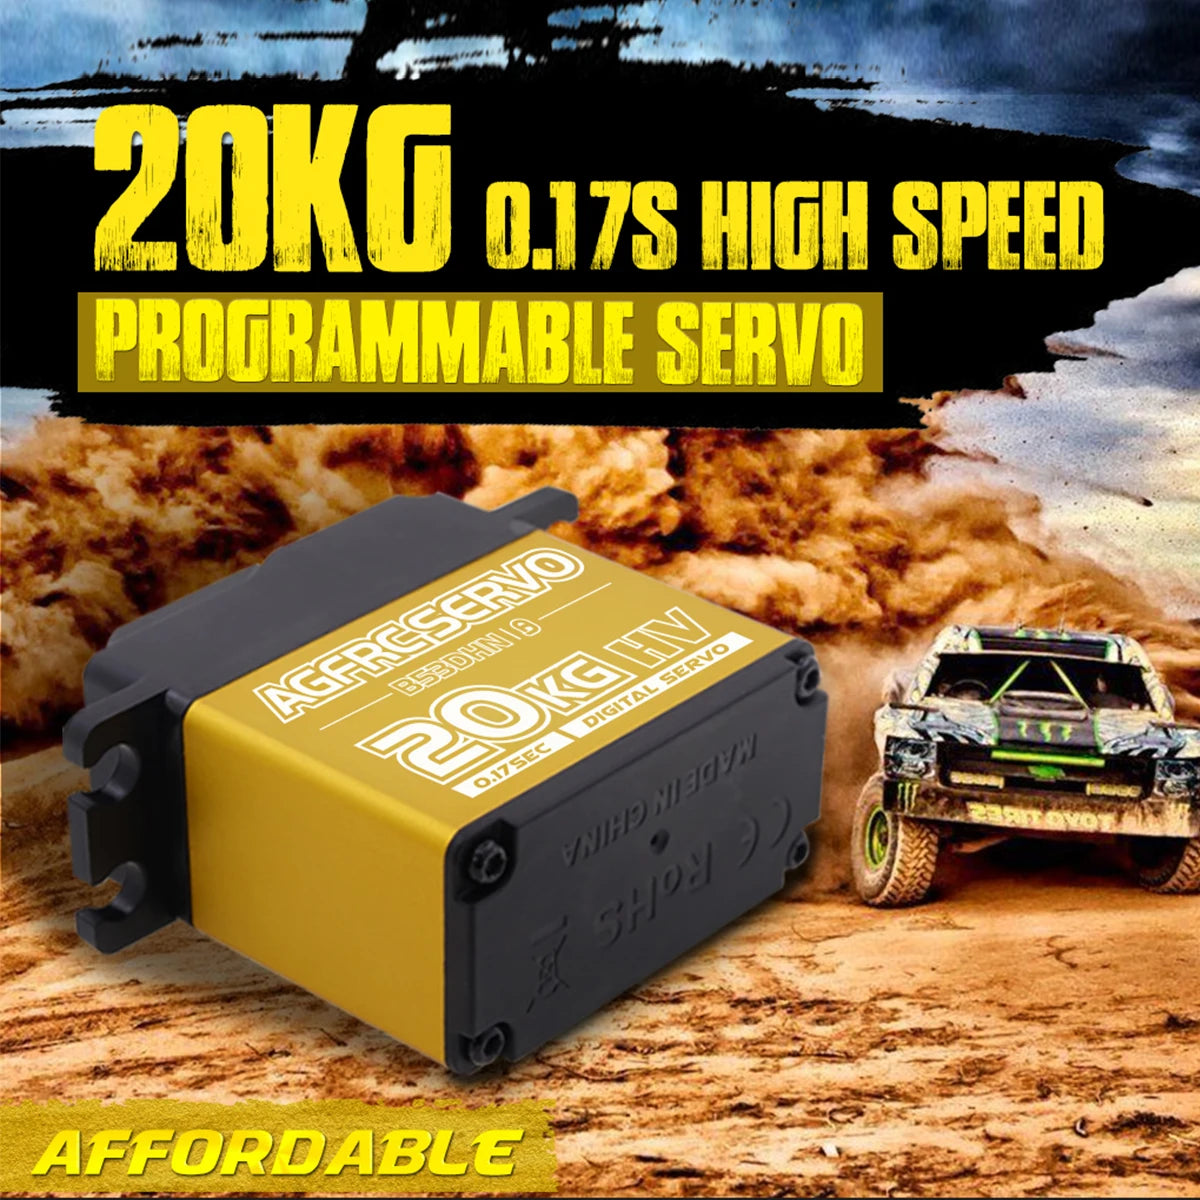 AGFRC B53DHN, ZOKO 017s Hgh SPEED PROORAMMABLE SERVO